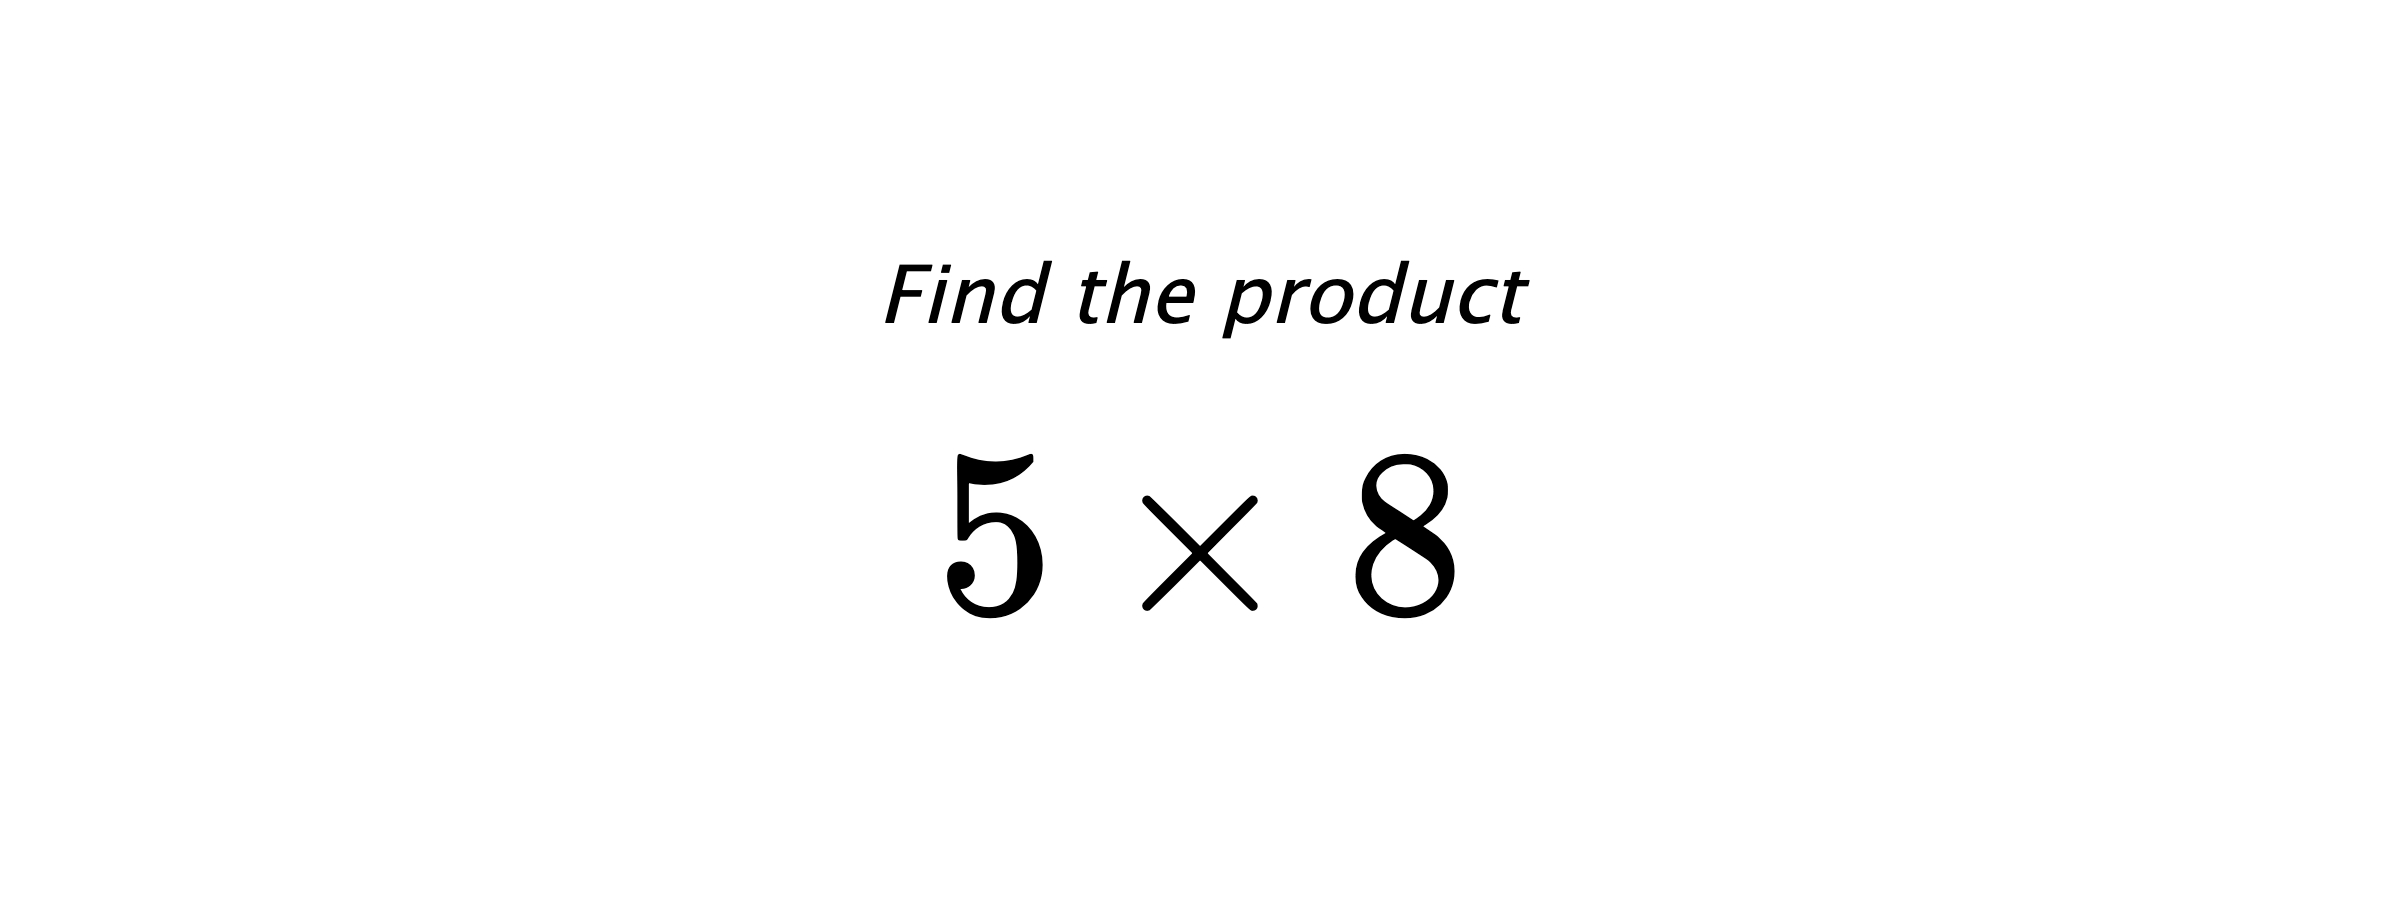 Find the product $ 5 \times 8 $